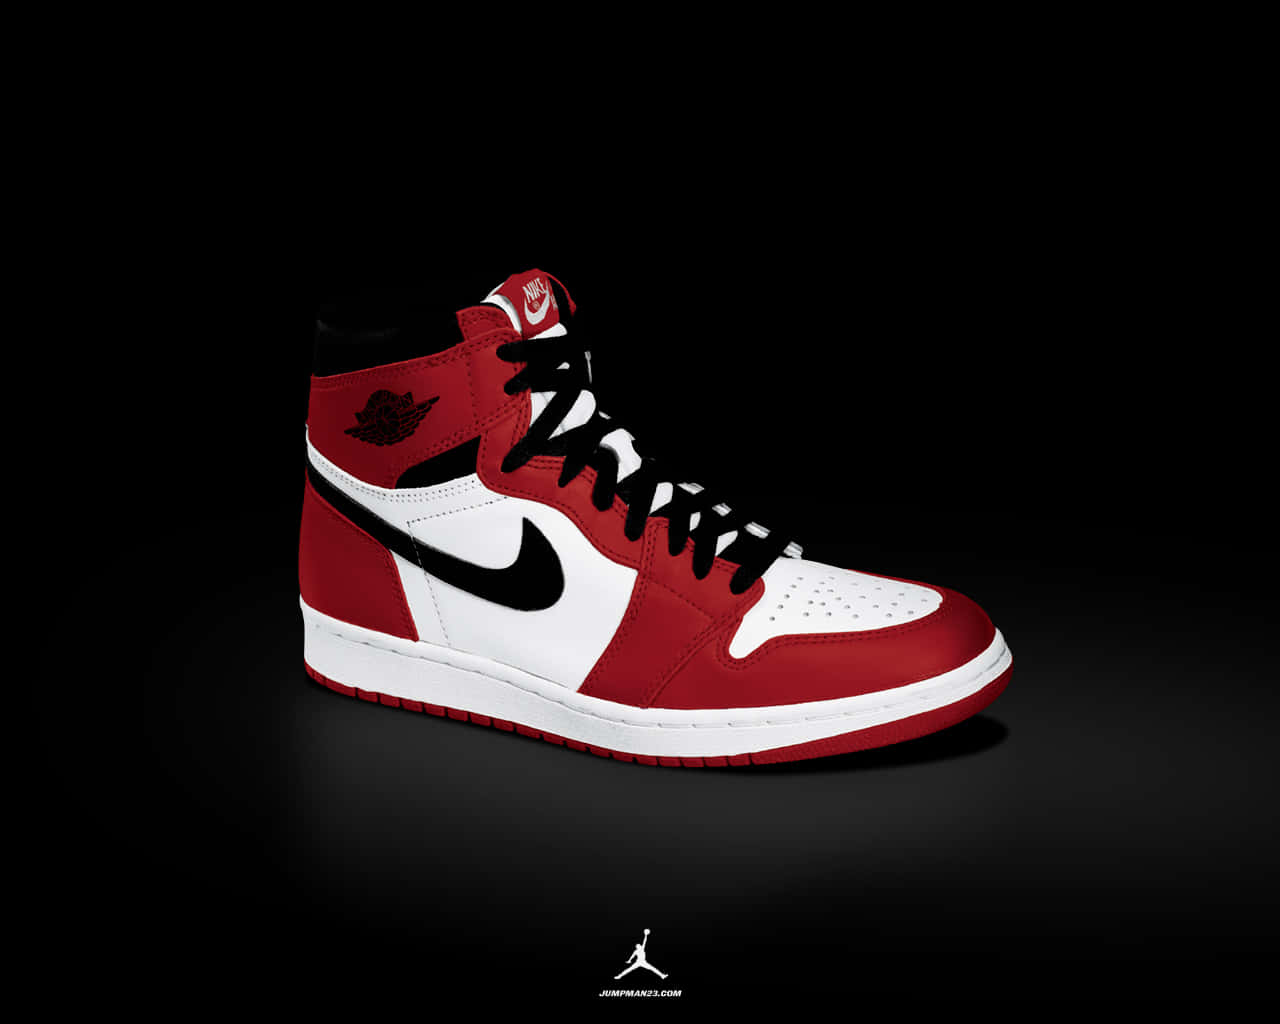 Download A Red And White Jordan Shoe On A Black Background | Wallpapers.com